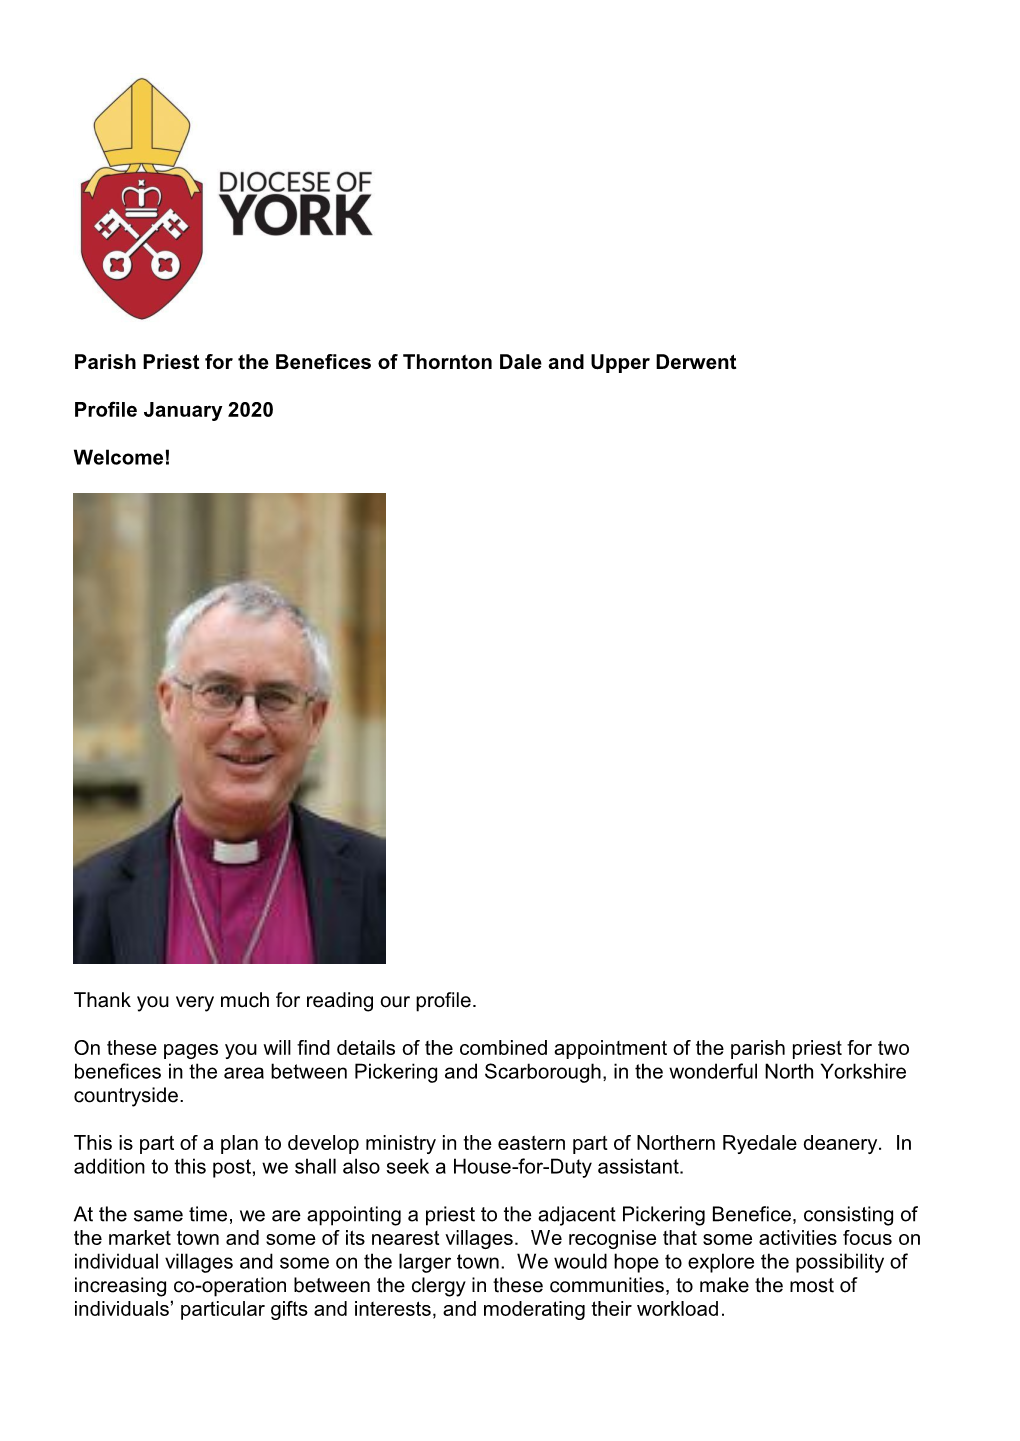 Parish Priest for the Benefices of Thornton Dale and Upper Derwent